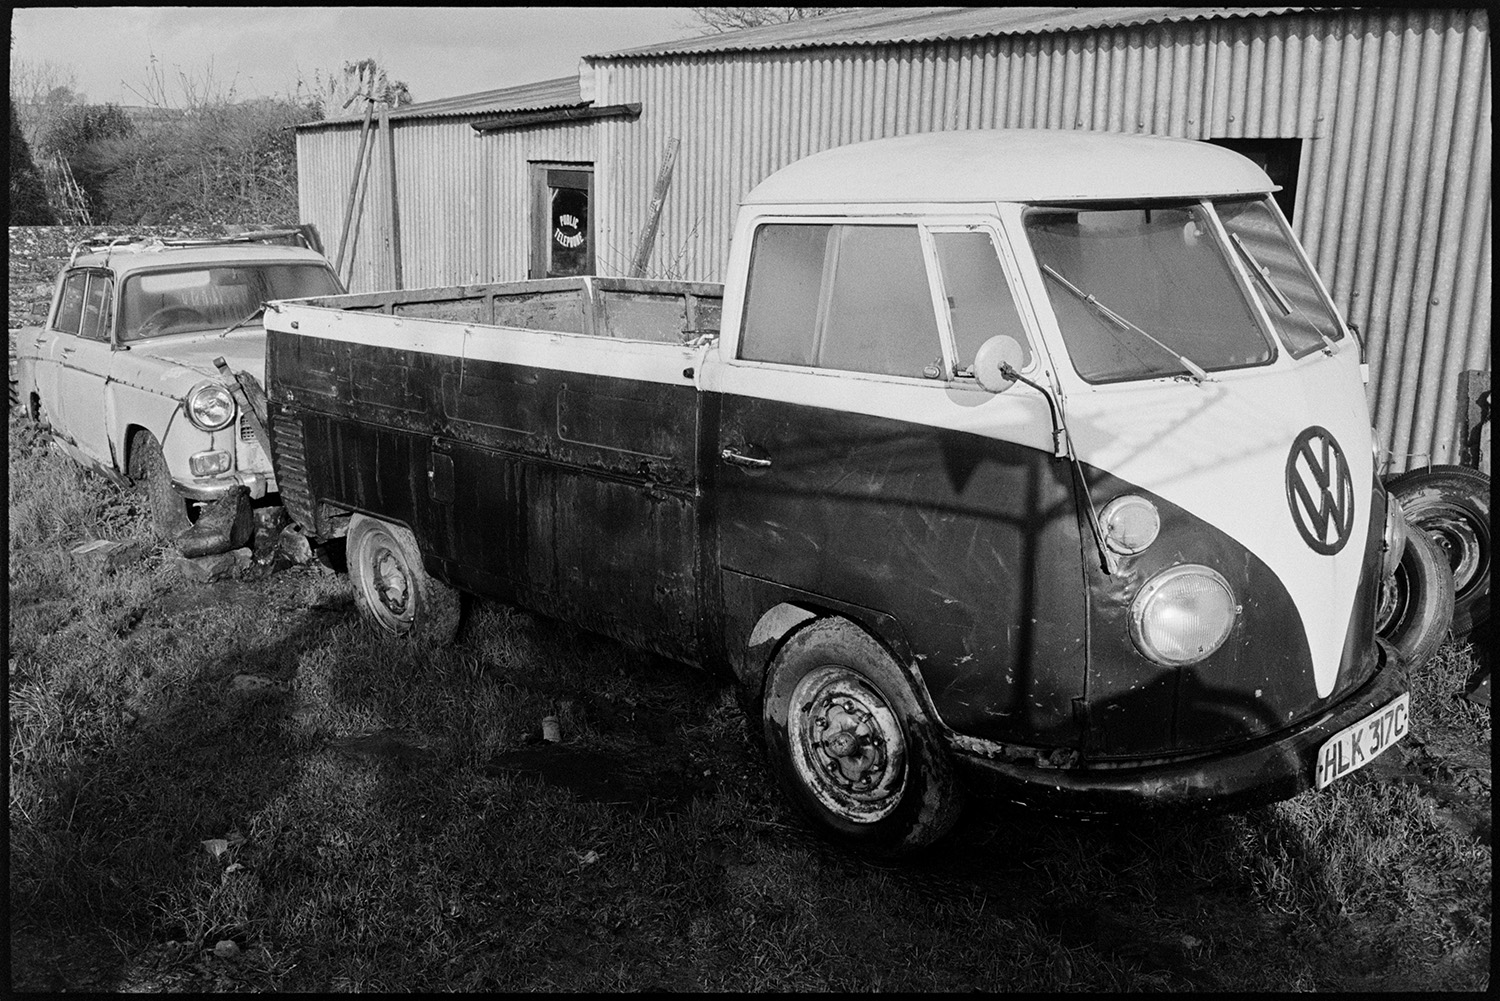 Van, pick up in mucky yard. 
[A Volkswagen pick up van and a car parked by a corrugated iron barn in a muddy yard.]